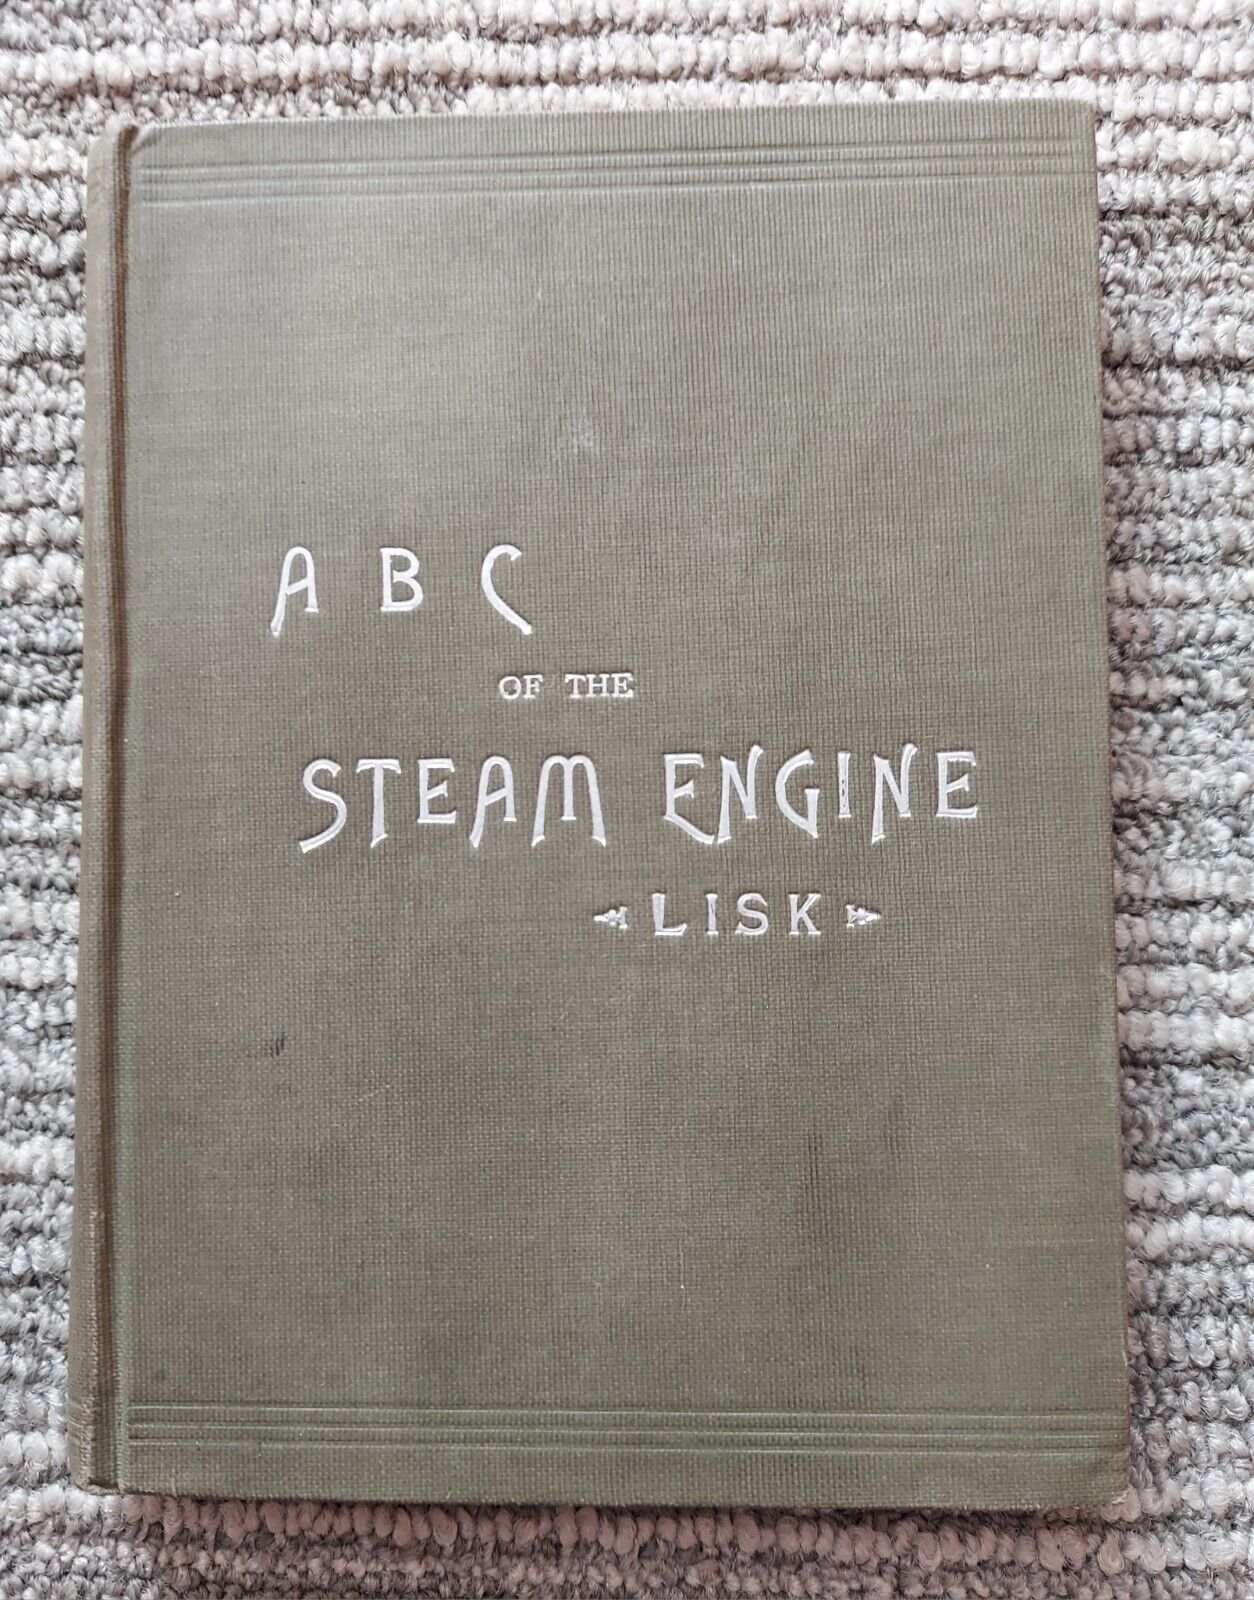 The ABC Of The Steam Engine, J. P. Lisk, 1902, Hardcover 